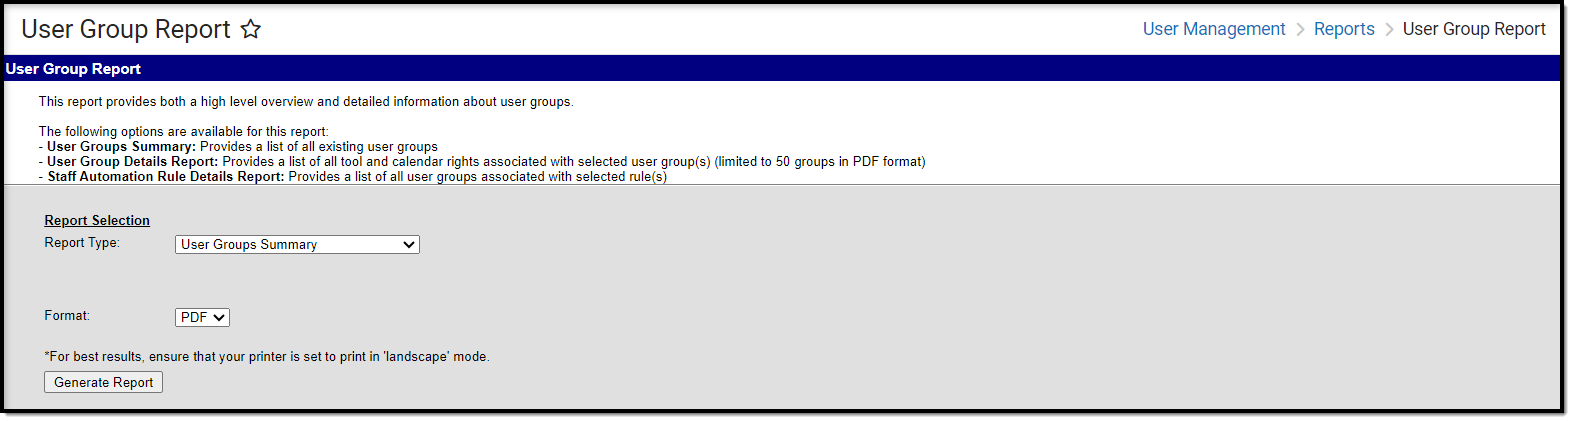 screenshot of the user group report